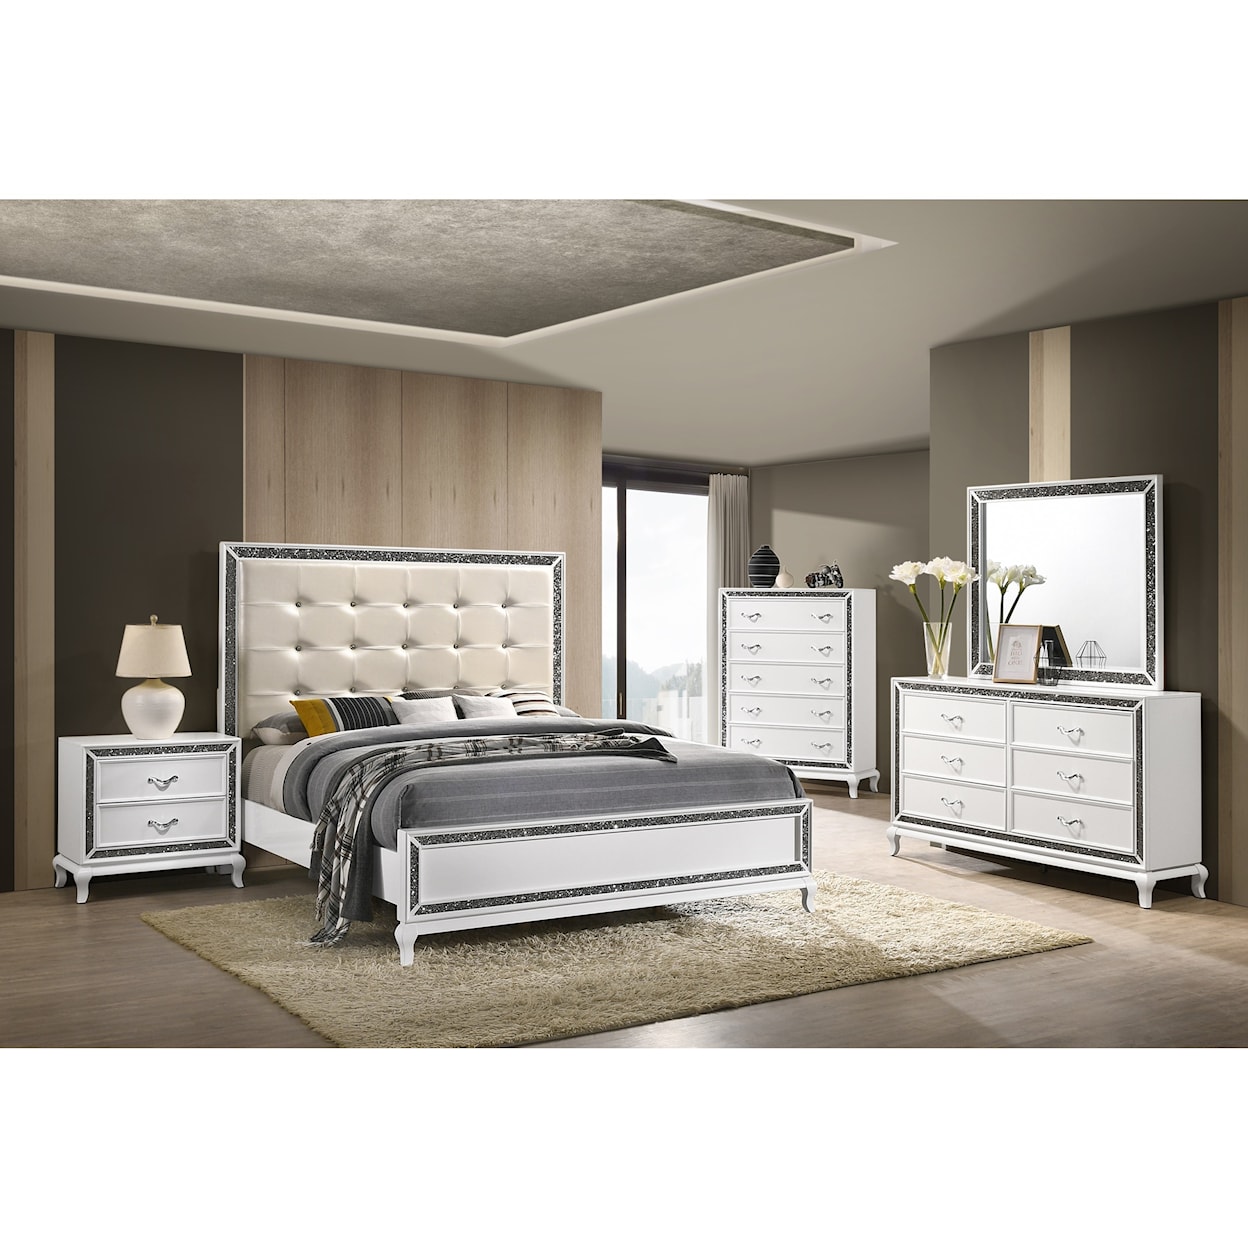 New Classic Park Imperial California King Bedroom Group